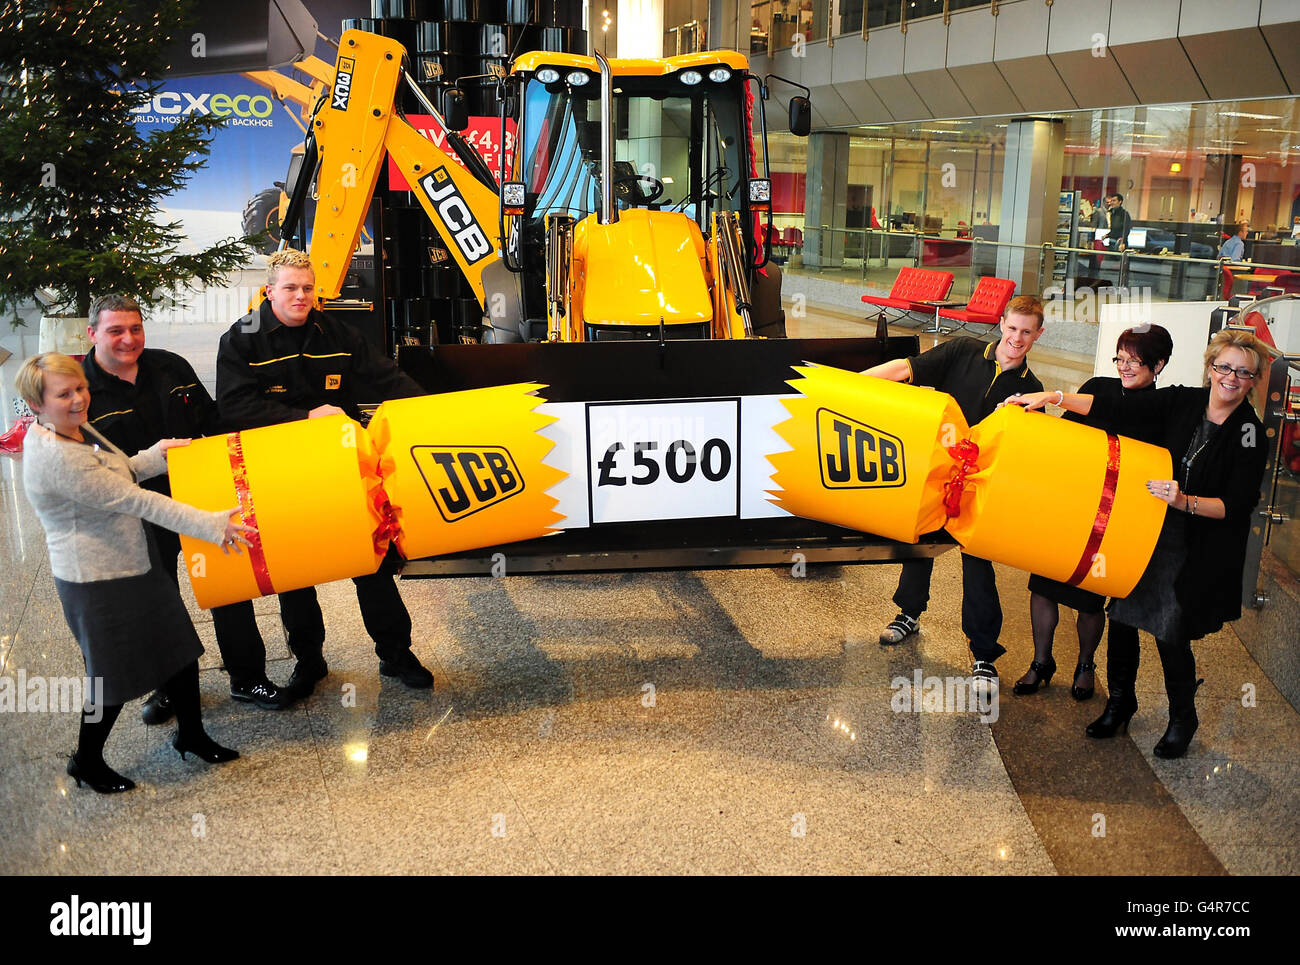 JCB employees celebrate after the company announced a &pound;500 Christmas bonus and a 5.2 per cent pay increase, at JCB HQ in Rocester. Stock Photo